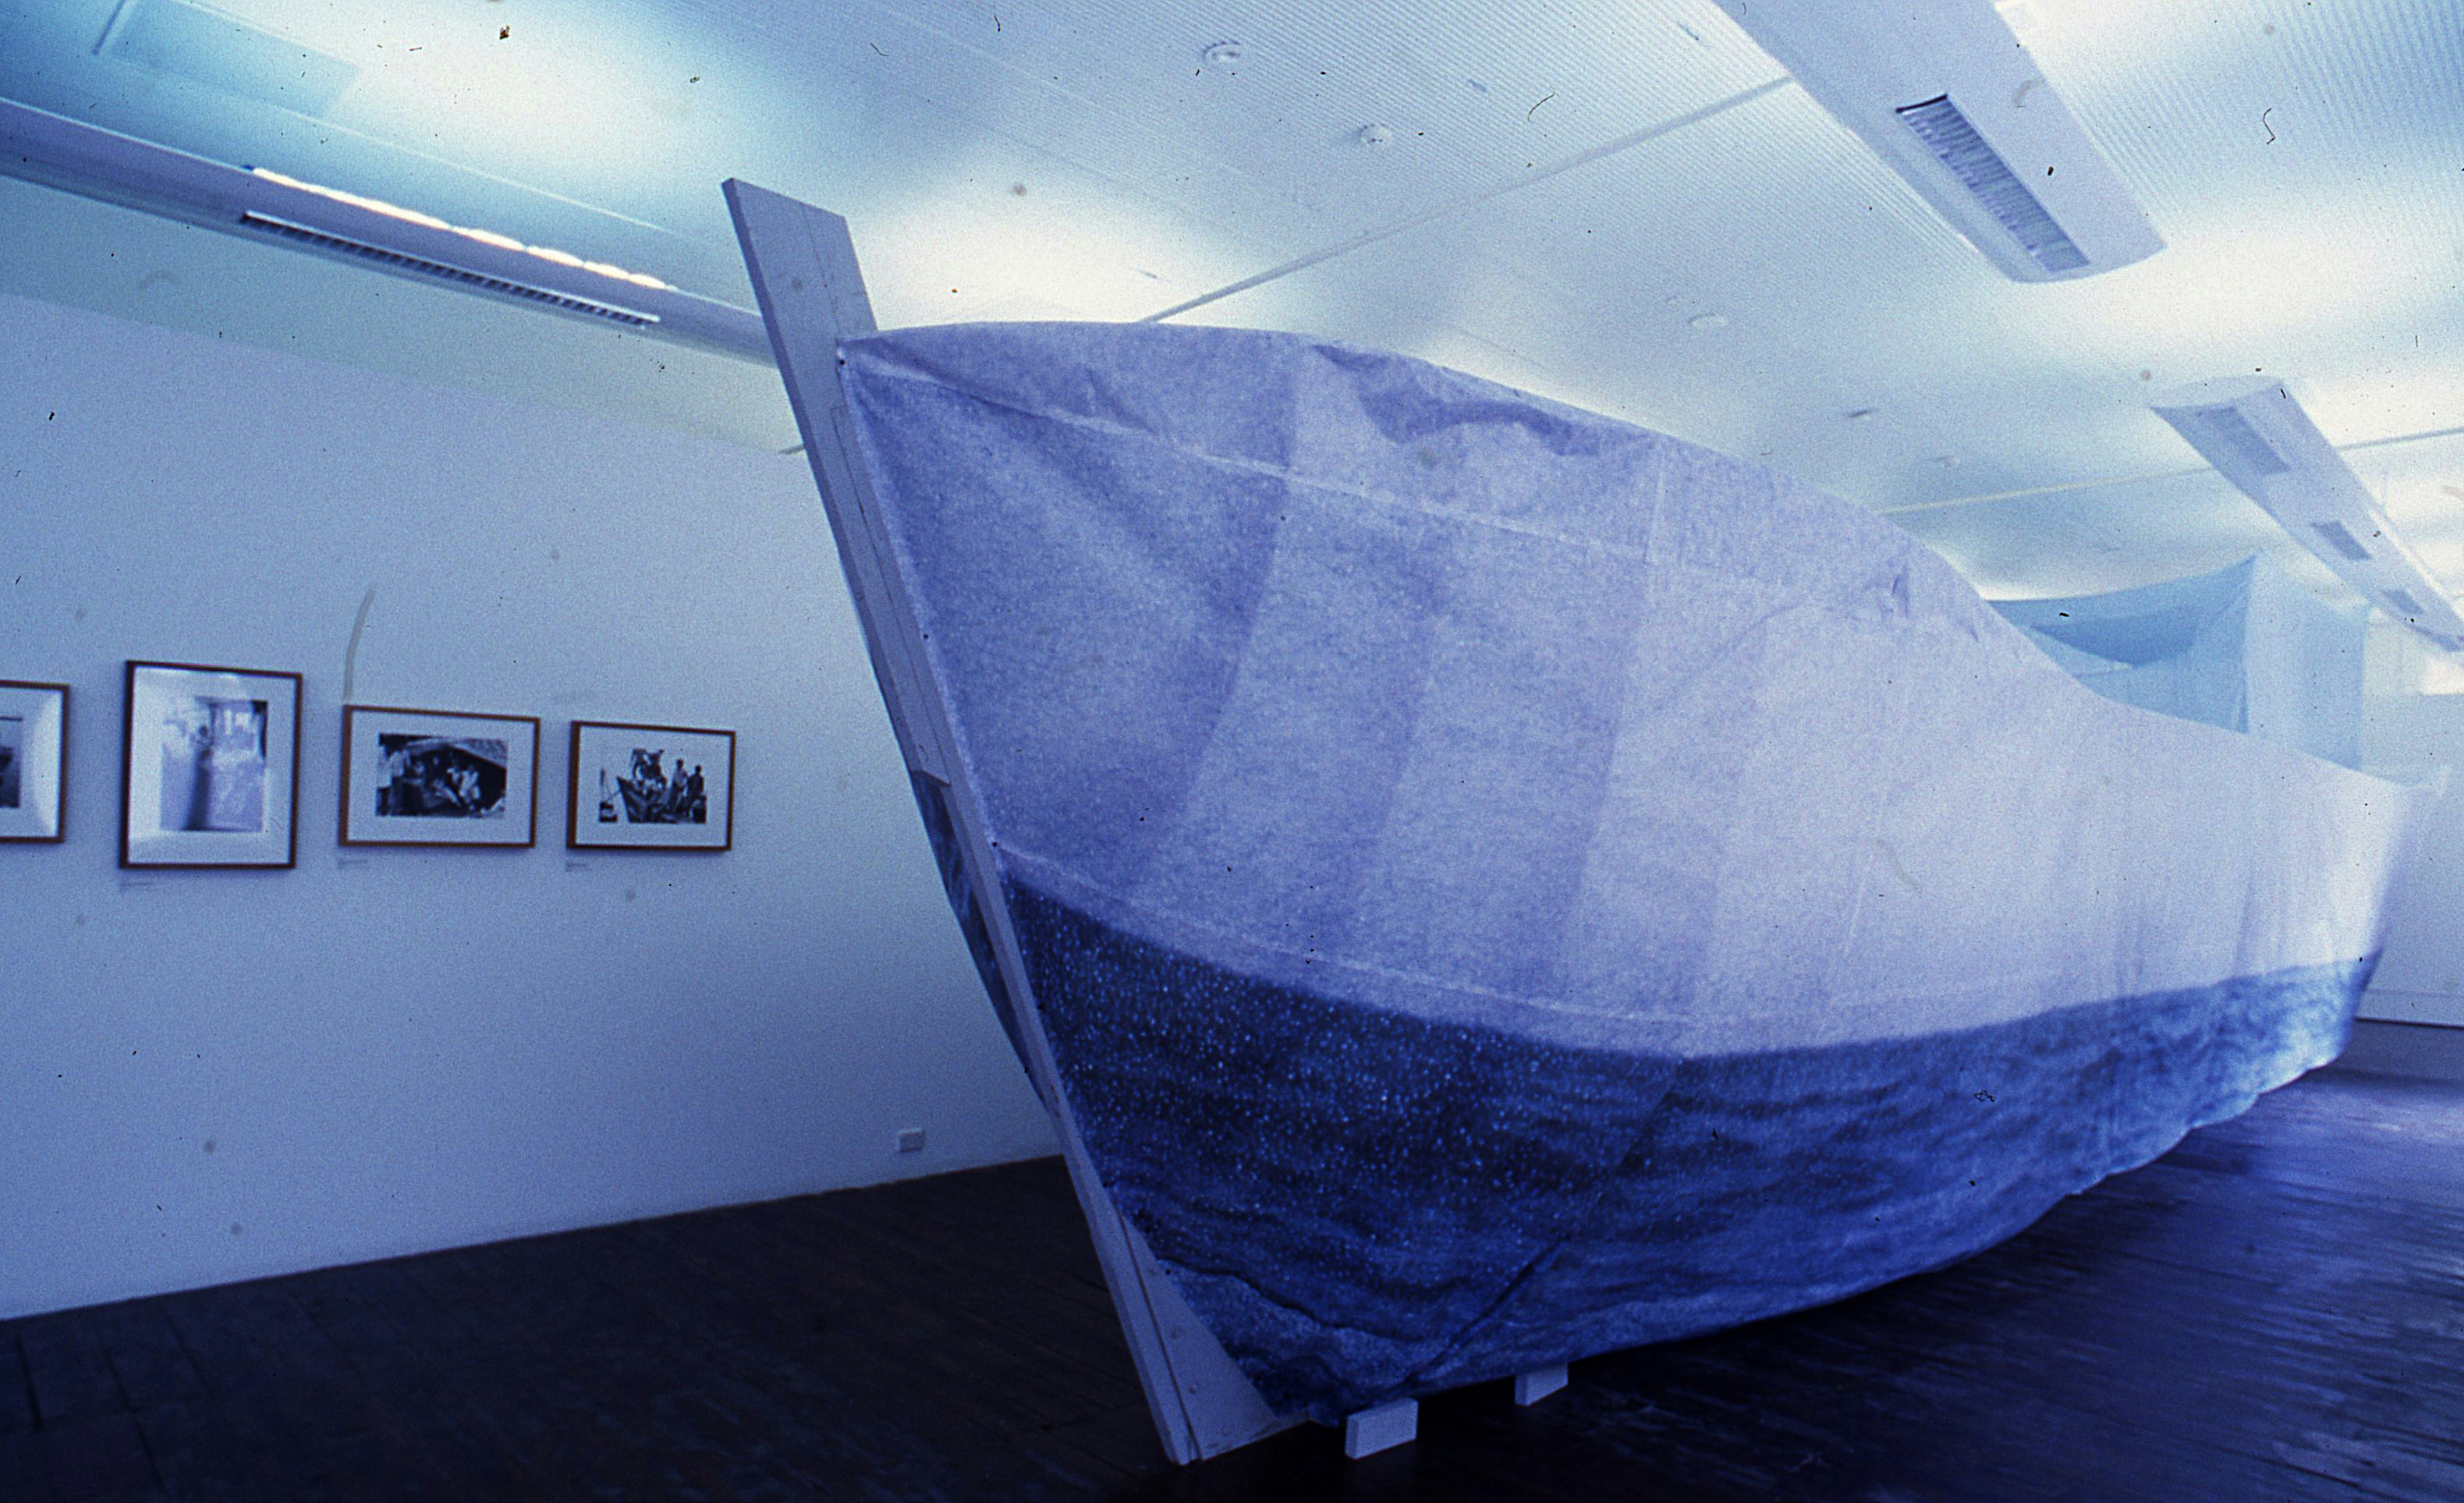 A large boat sculpture in a gallery space. On the wall nearby are framed black-and-white photographs.